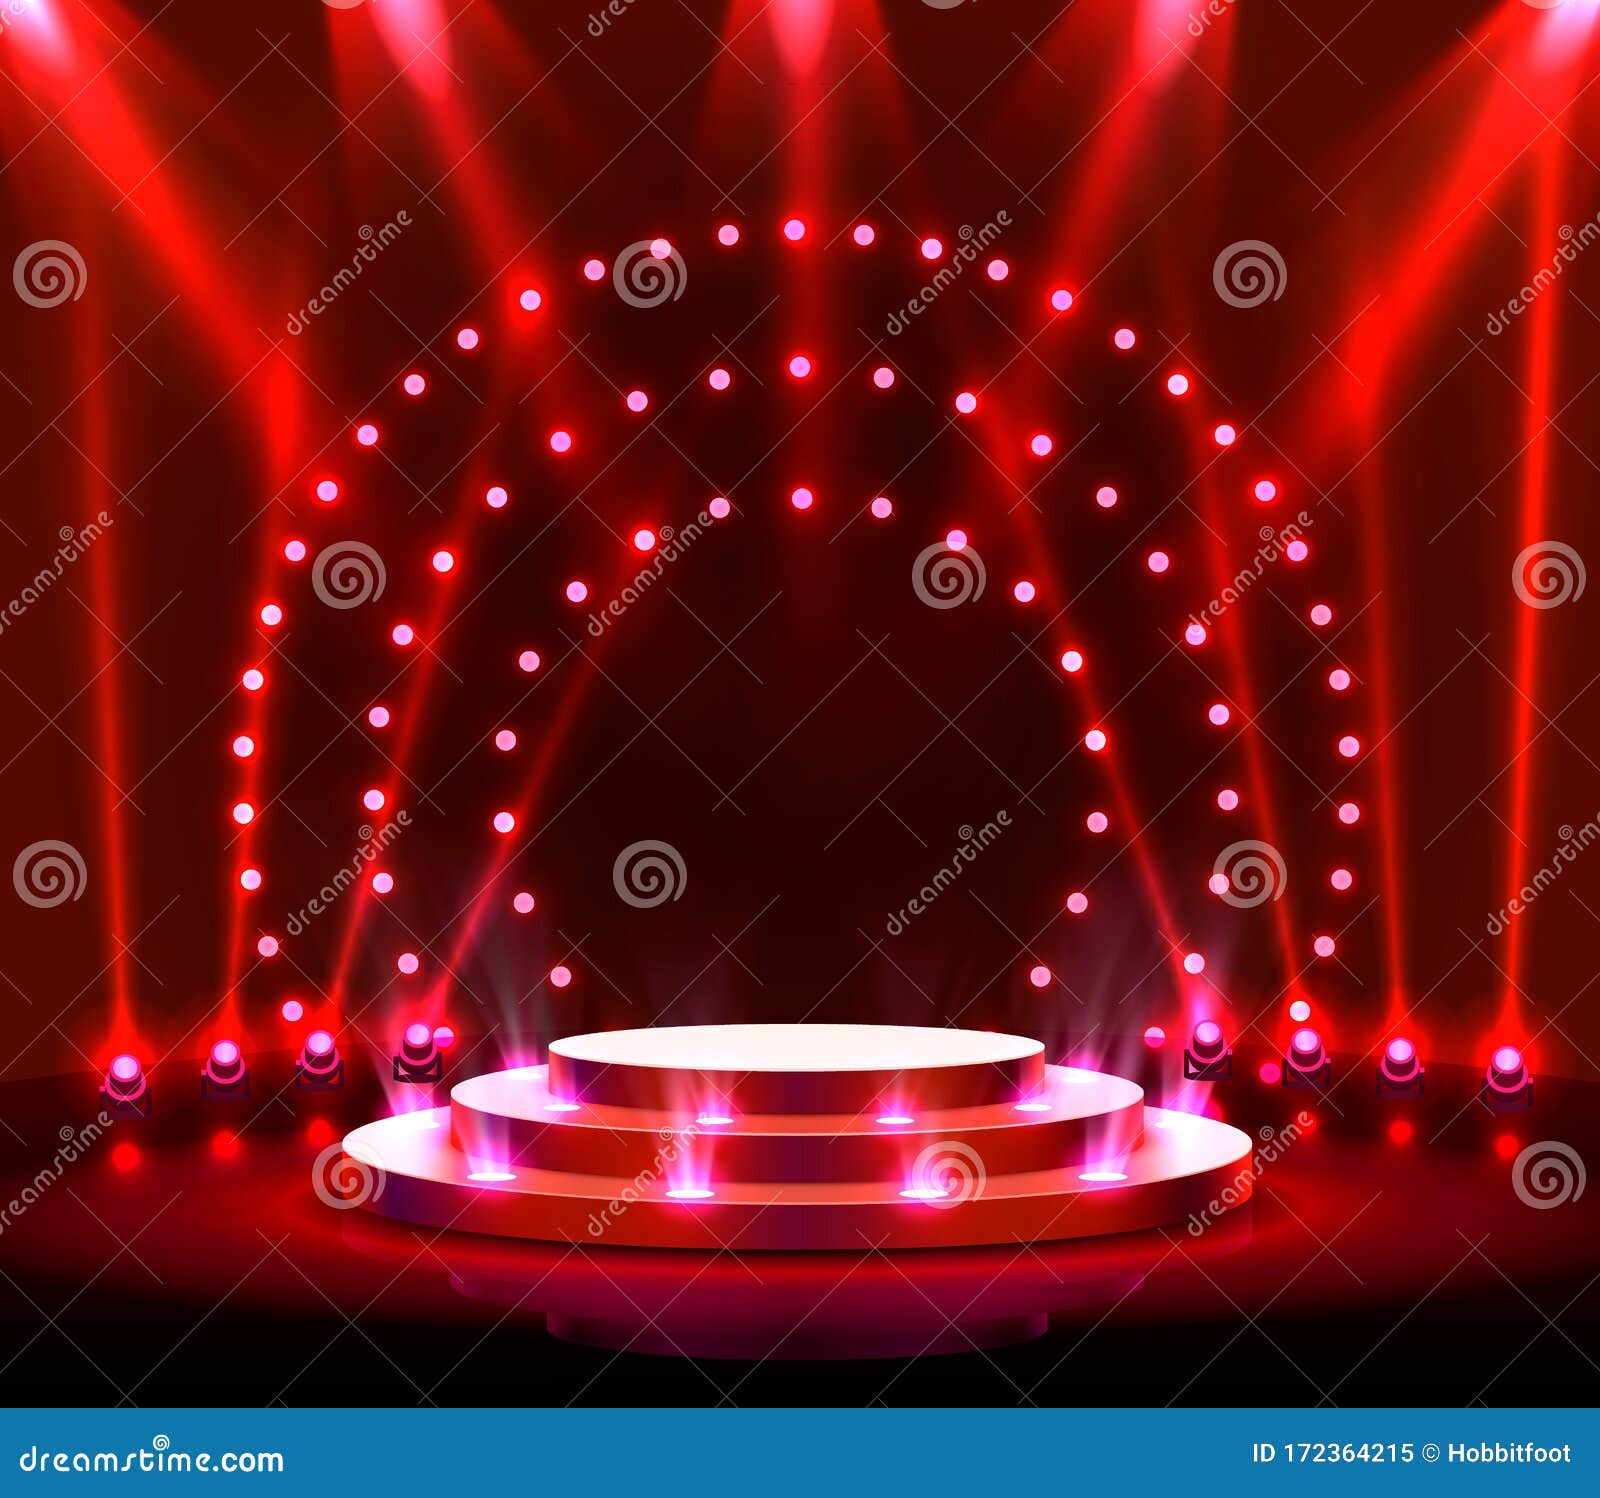 Stage Podium with Lighting, Stage Podium Scene with for Award Ceremony on  Red Background. Stock Vector - Illustration of celebration, glowing:  172364215